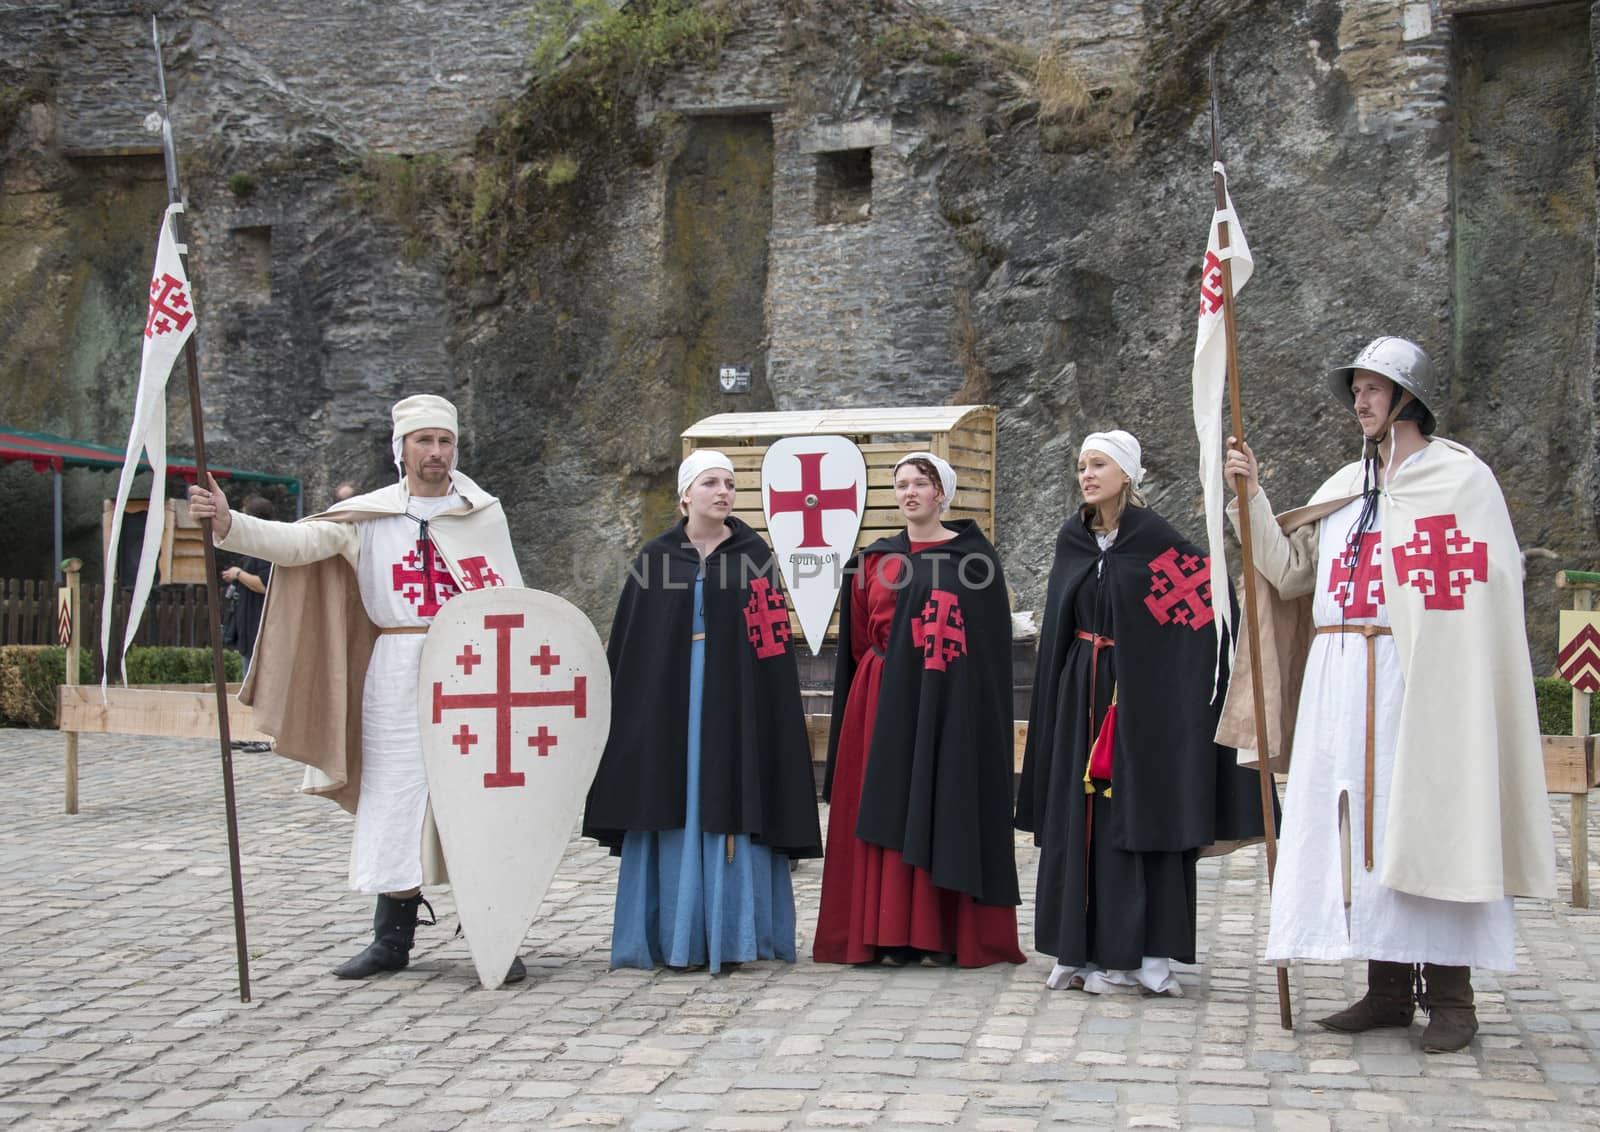 People dressed in medieval clothes in Bouillon by compuinfoto